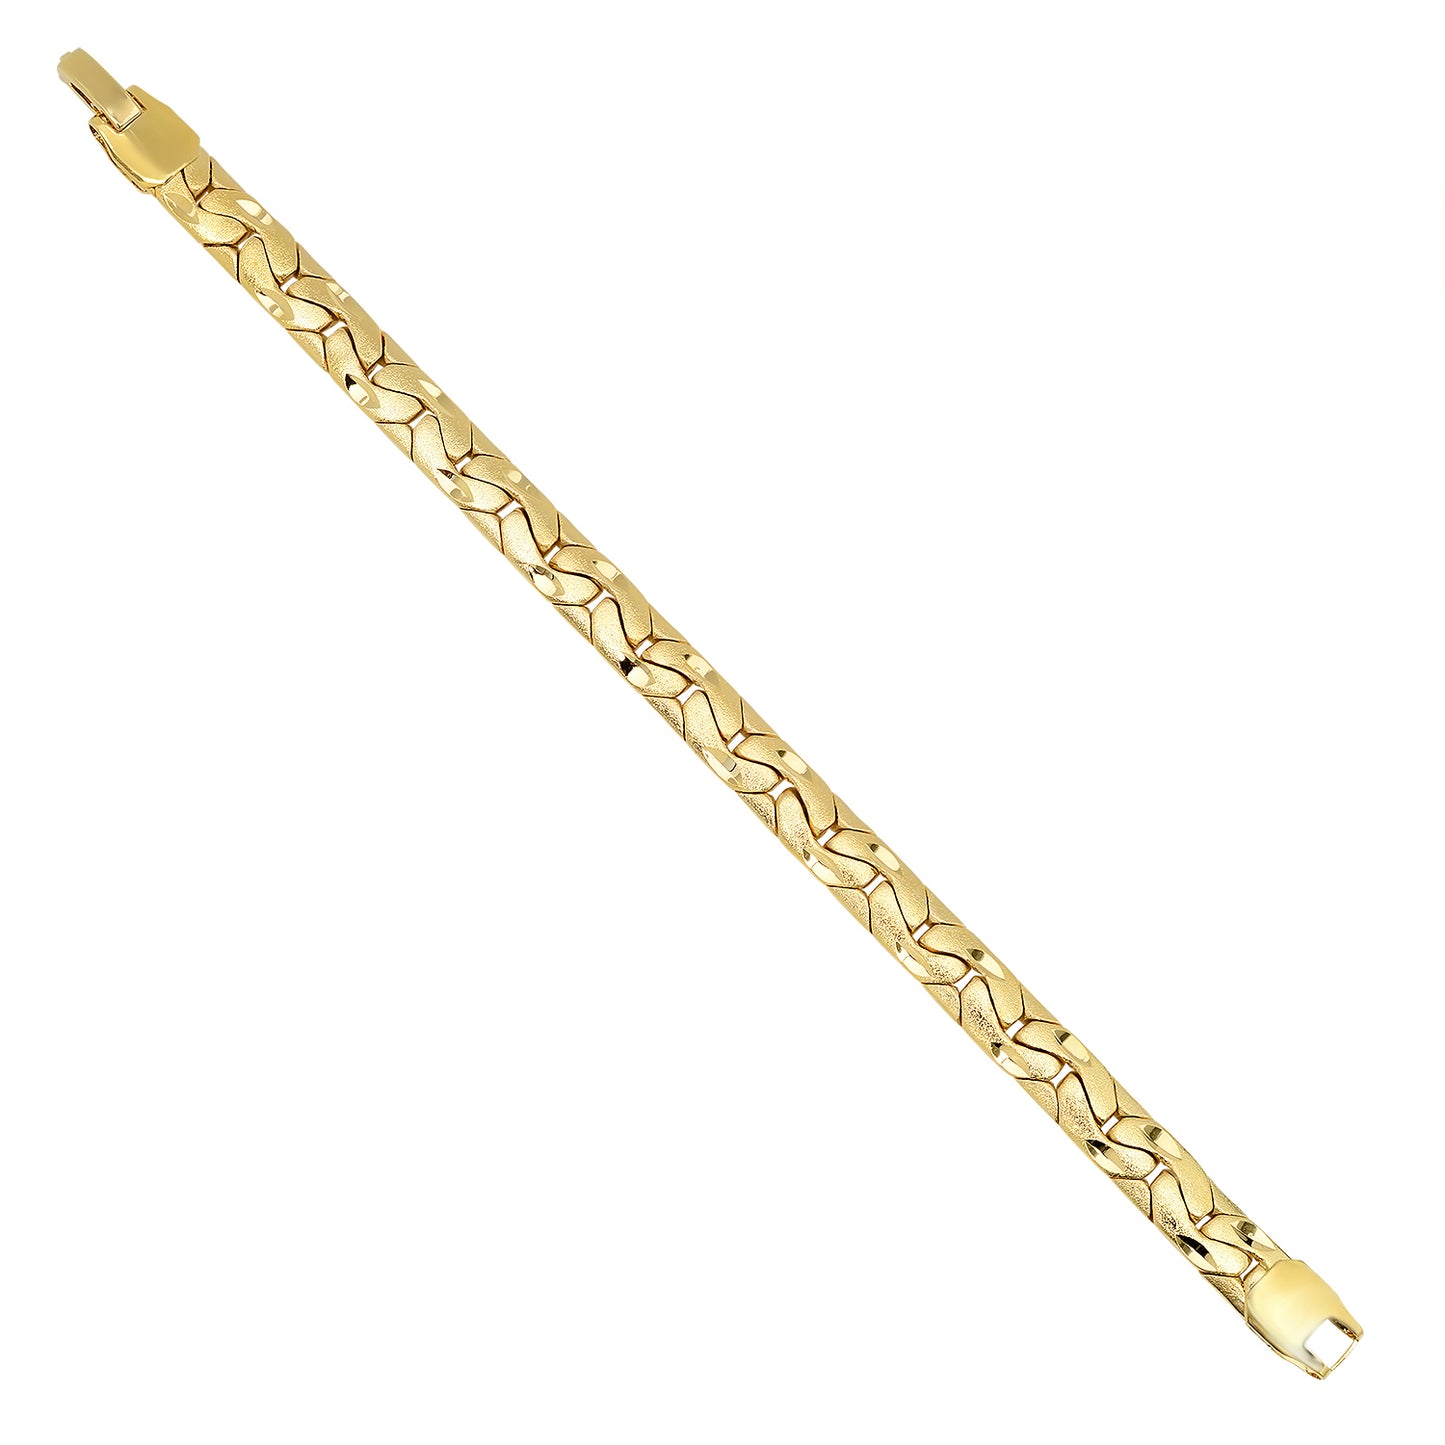 Gold Plated Textured Flat Mariner Link Anchor Style Bracelet + Jewelry Polishing Cloth (SKU: GL-LB78)